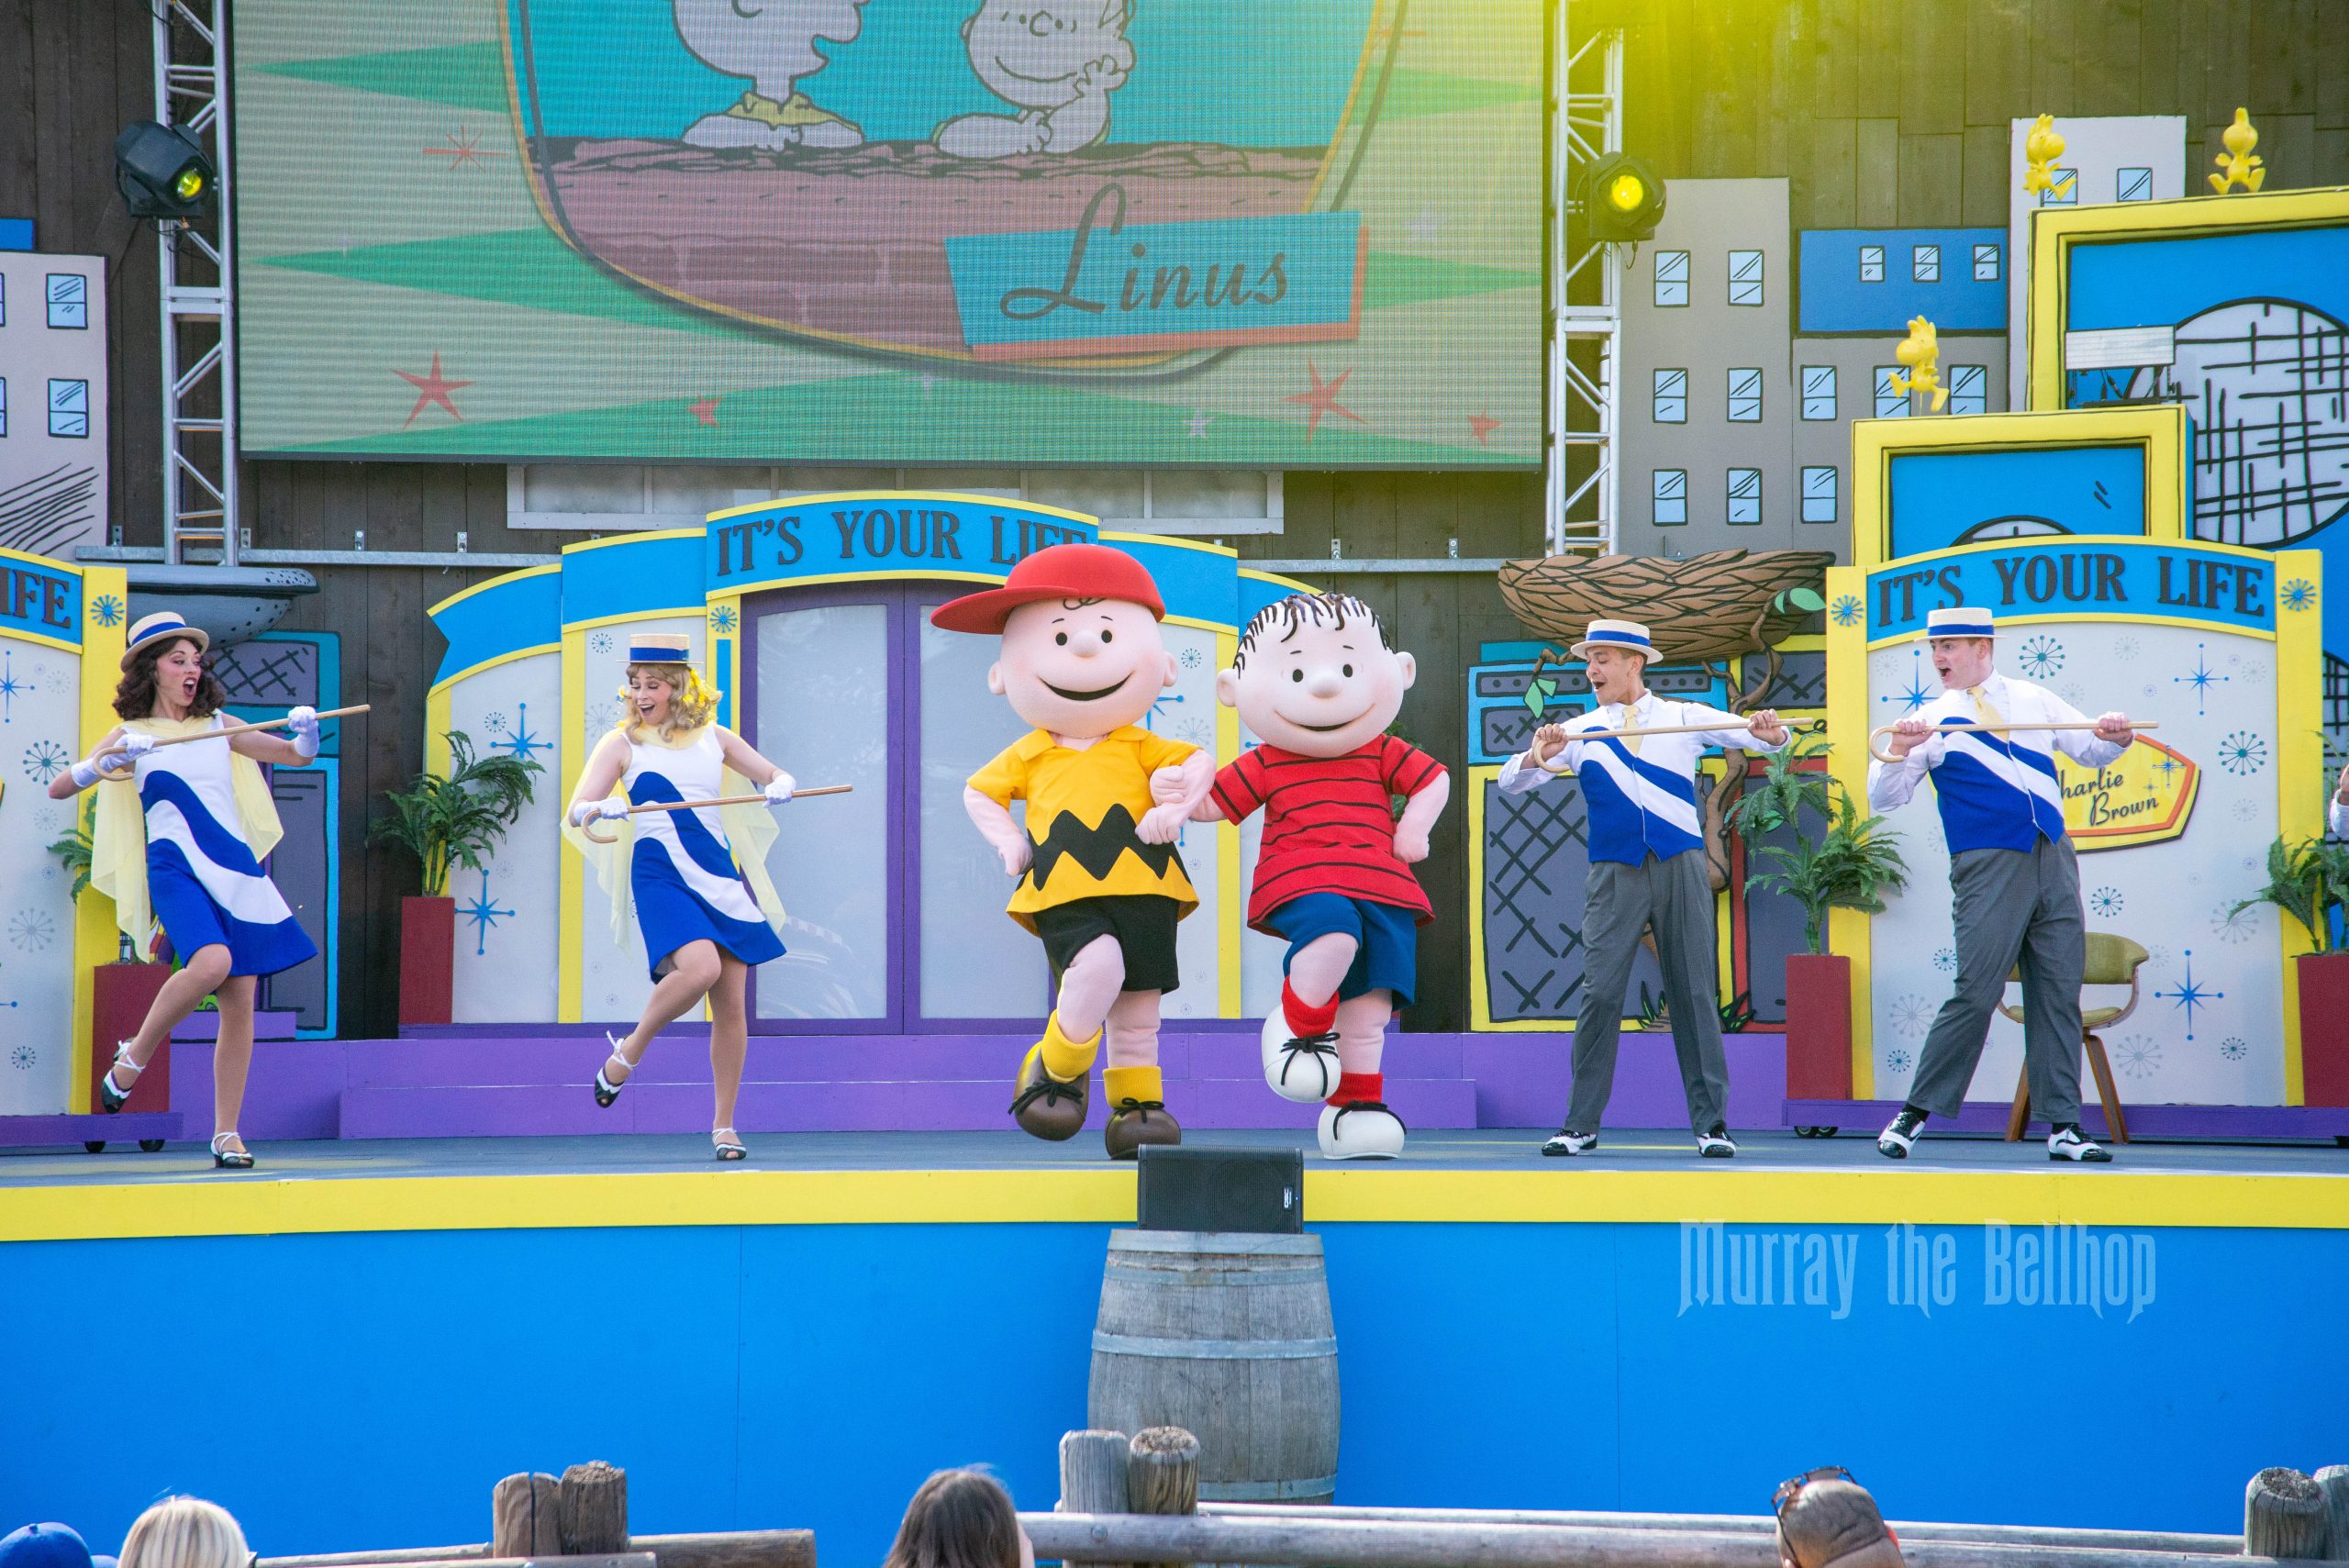 Peanuts Celebration Returns to Knott’s Berry Farm with a Tribute to Franklin